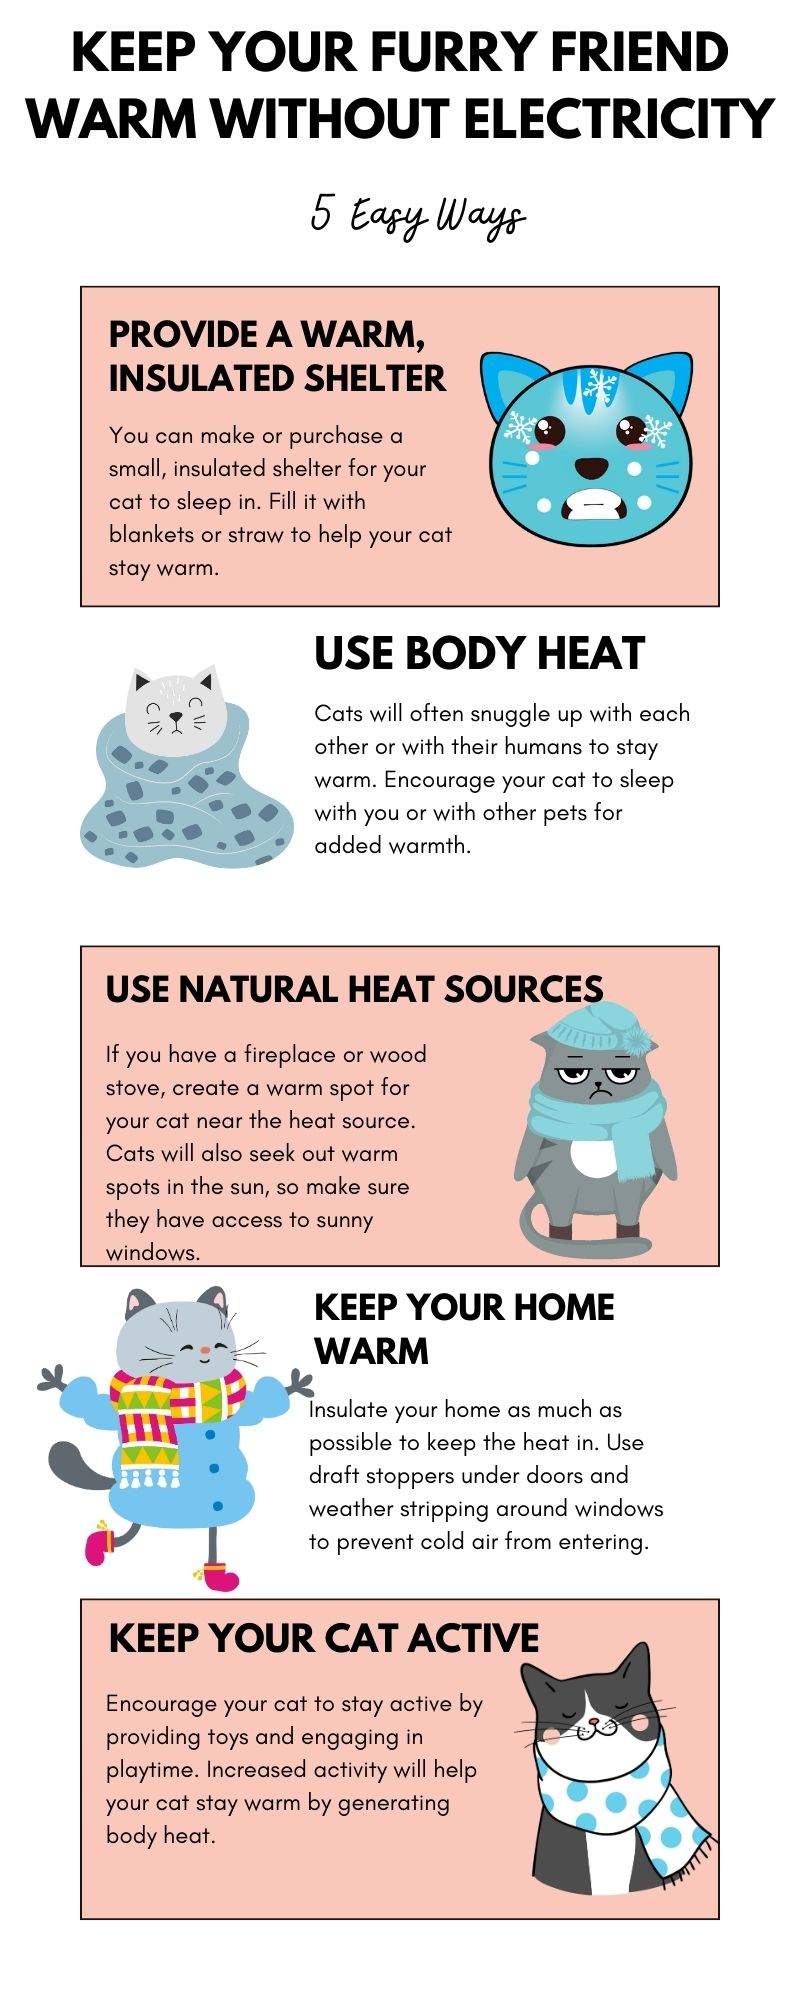 Keep Your Furry Friend Warm Without Electricity (Infographic)